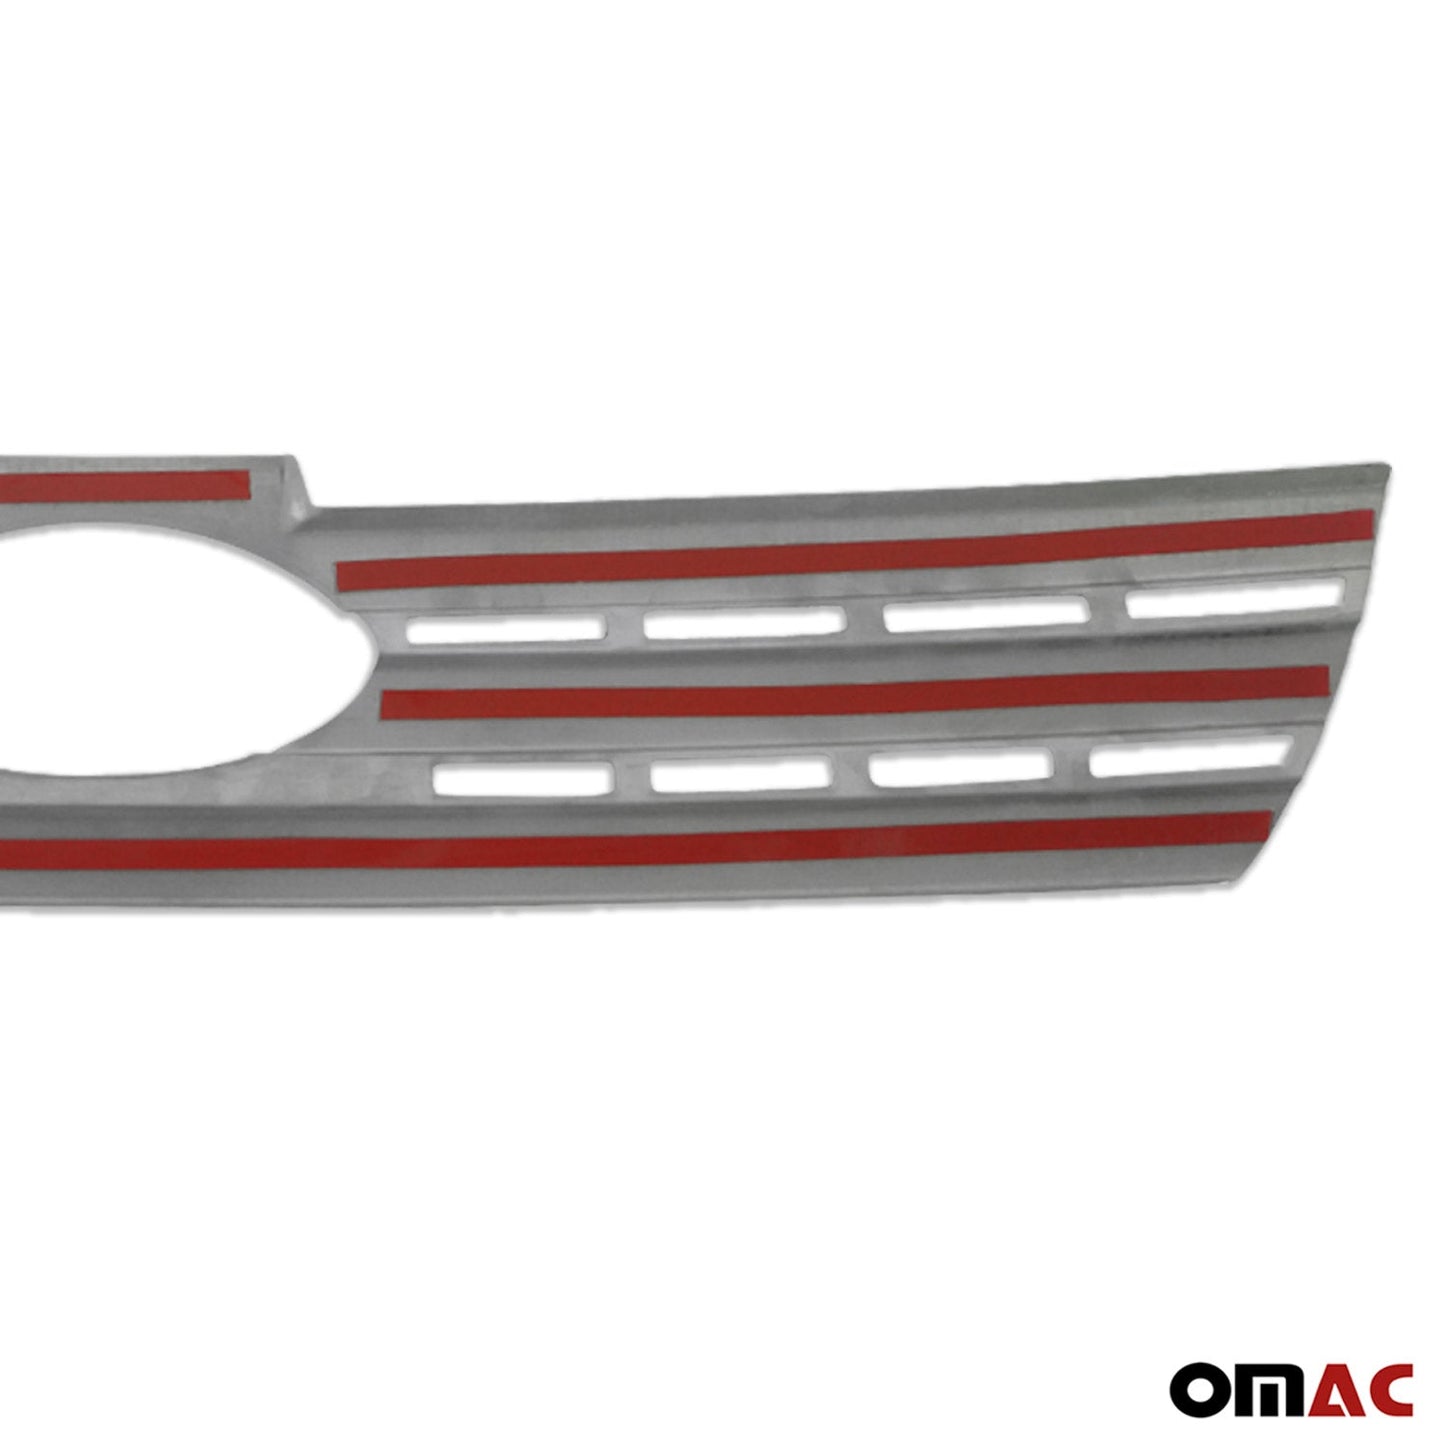 OMAC Front Bumper Grill Trim Molding for Ford Transit Connect 2010-2013 Steel 2x 2622083